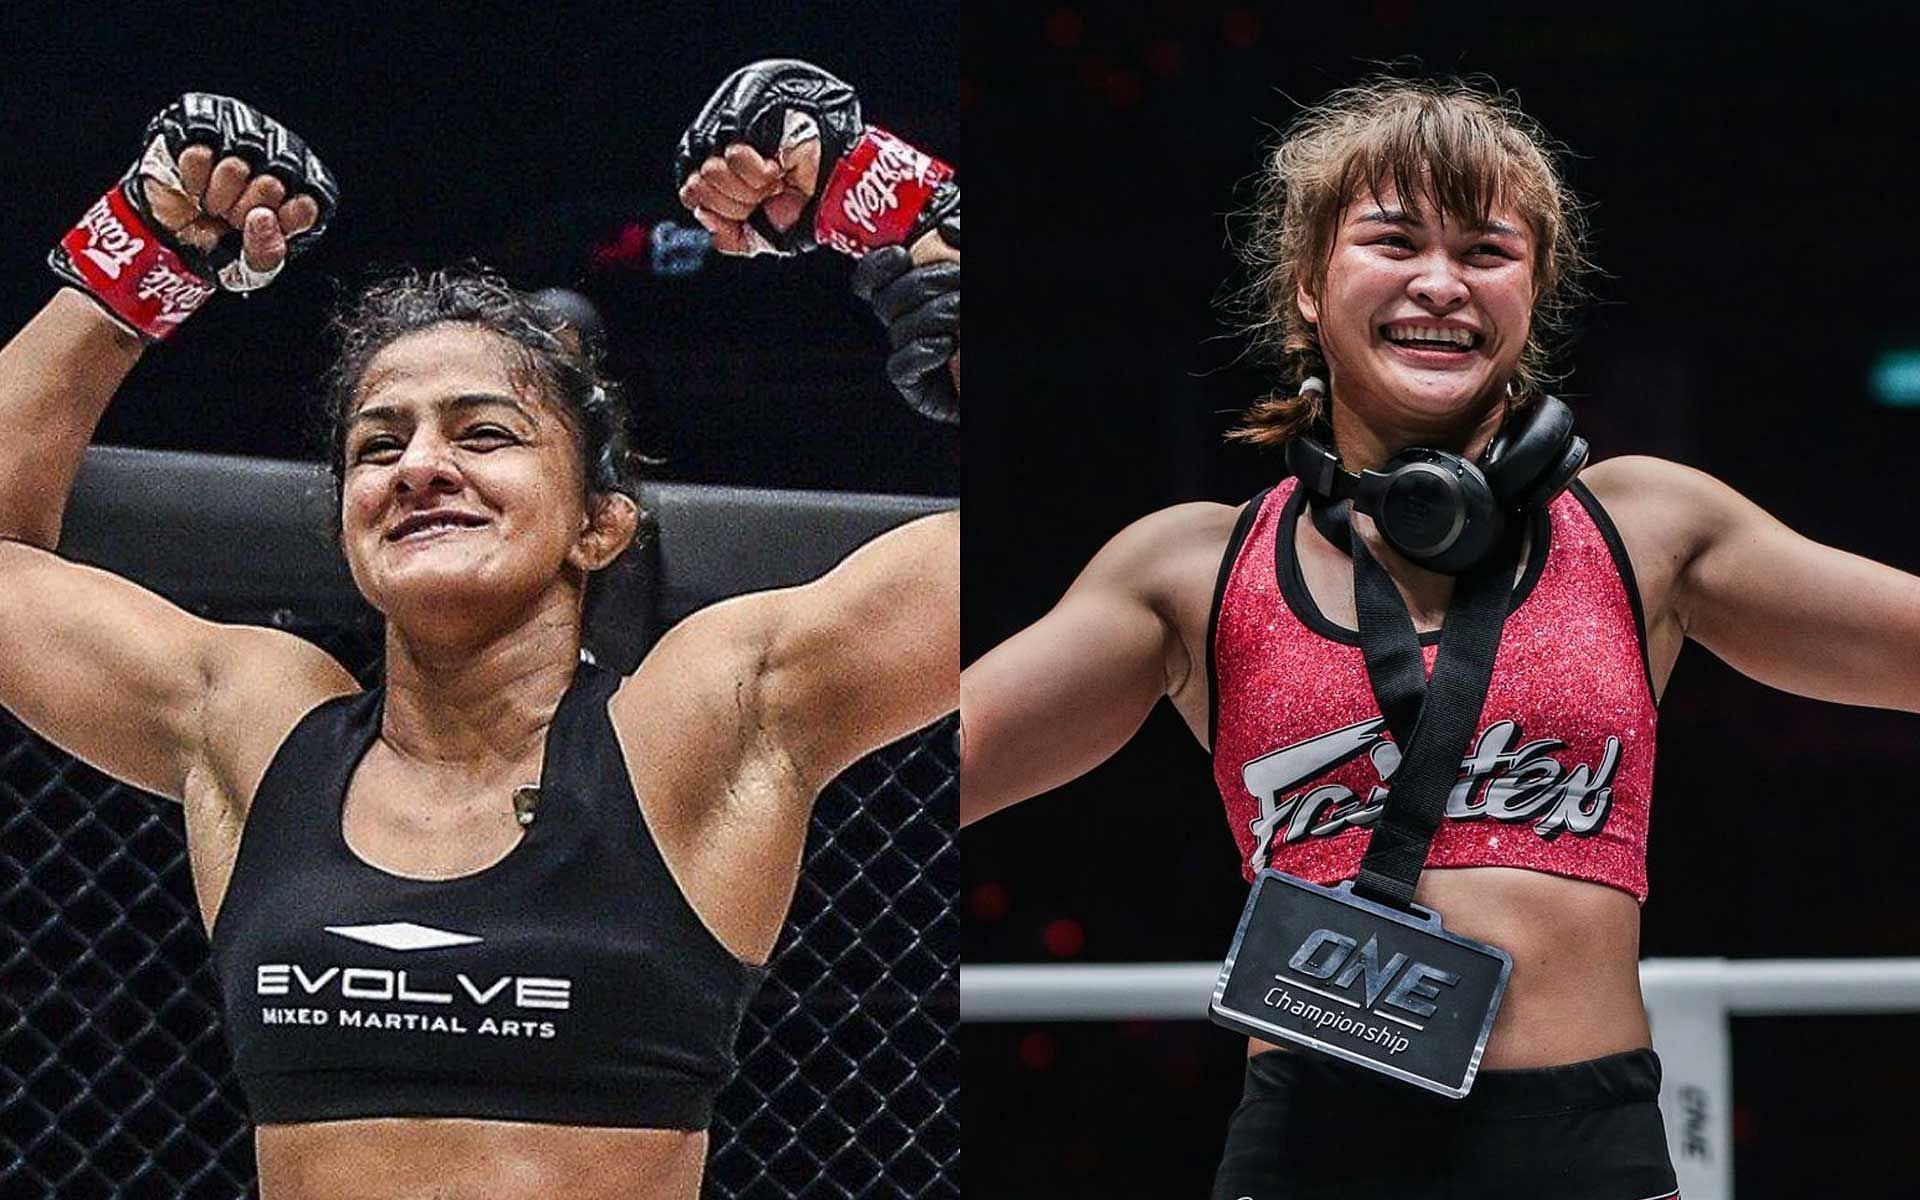 Ritu Phogat (left) thinks Stamp Fairtex (right) is scared of her [Photo courtesy of ONE Championship]